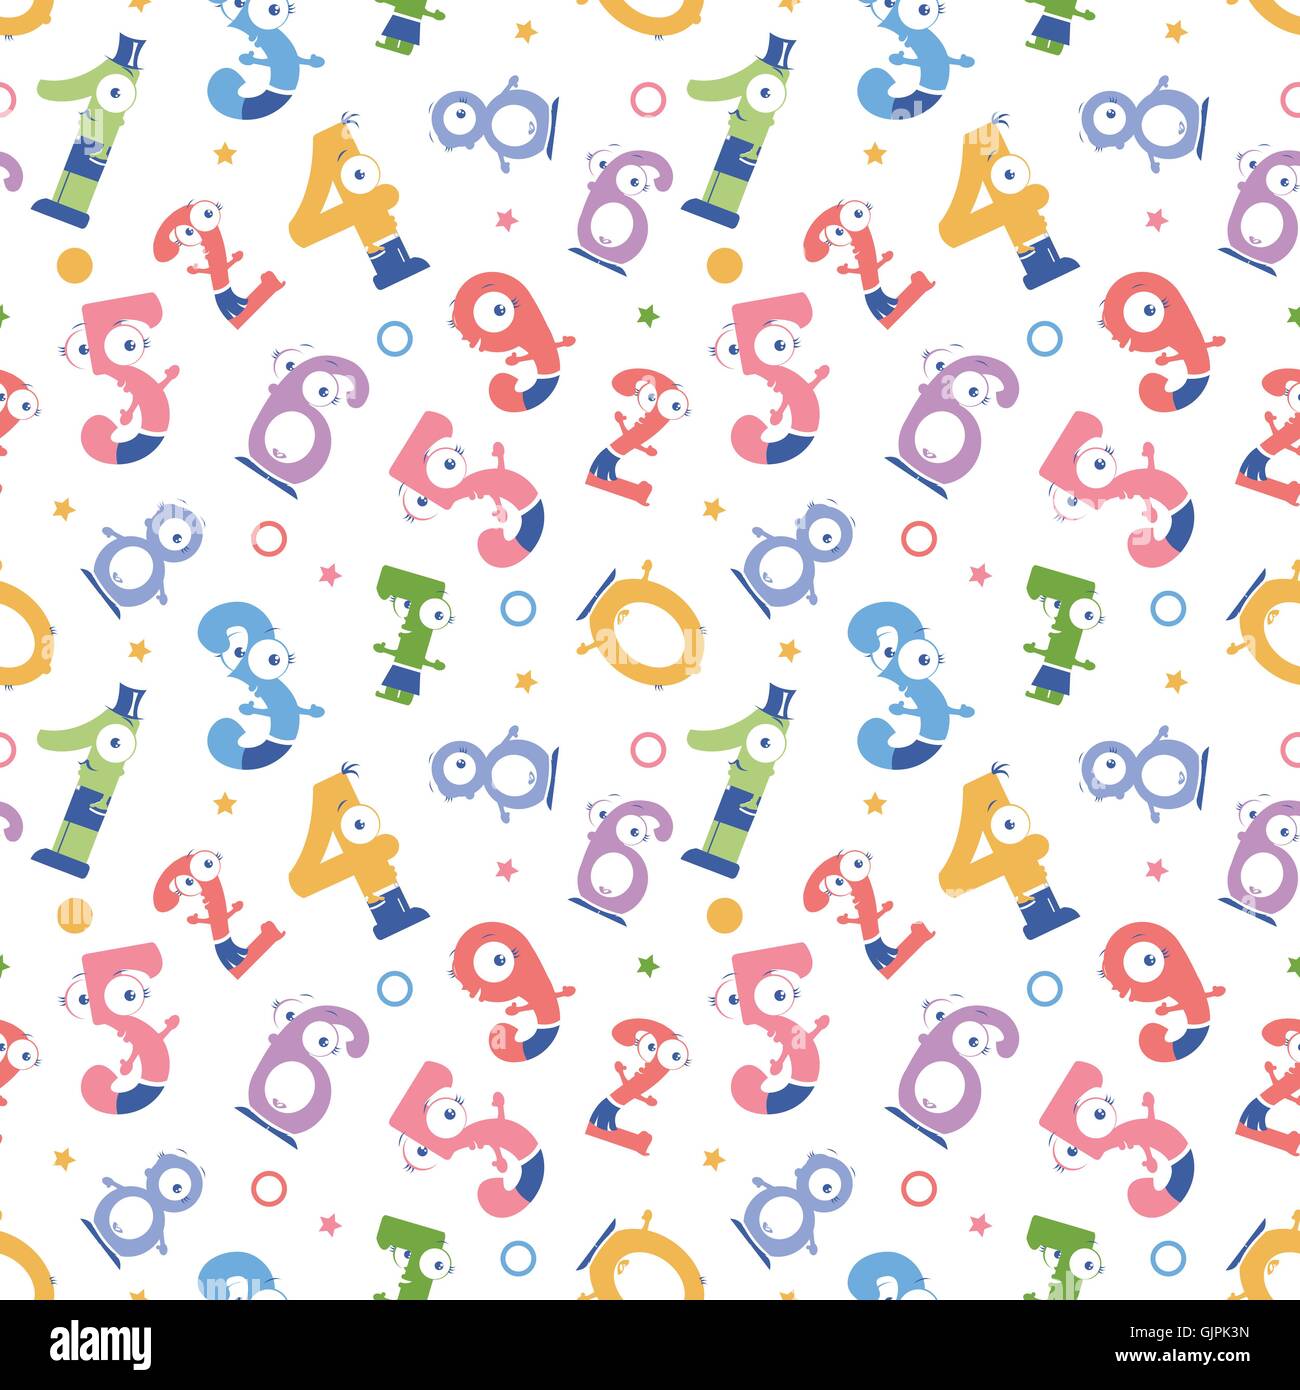 Fun numbers seamless pattern background Stock Vector